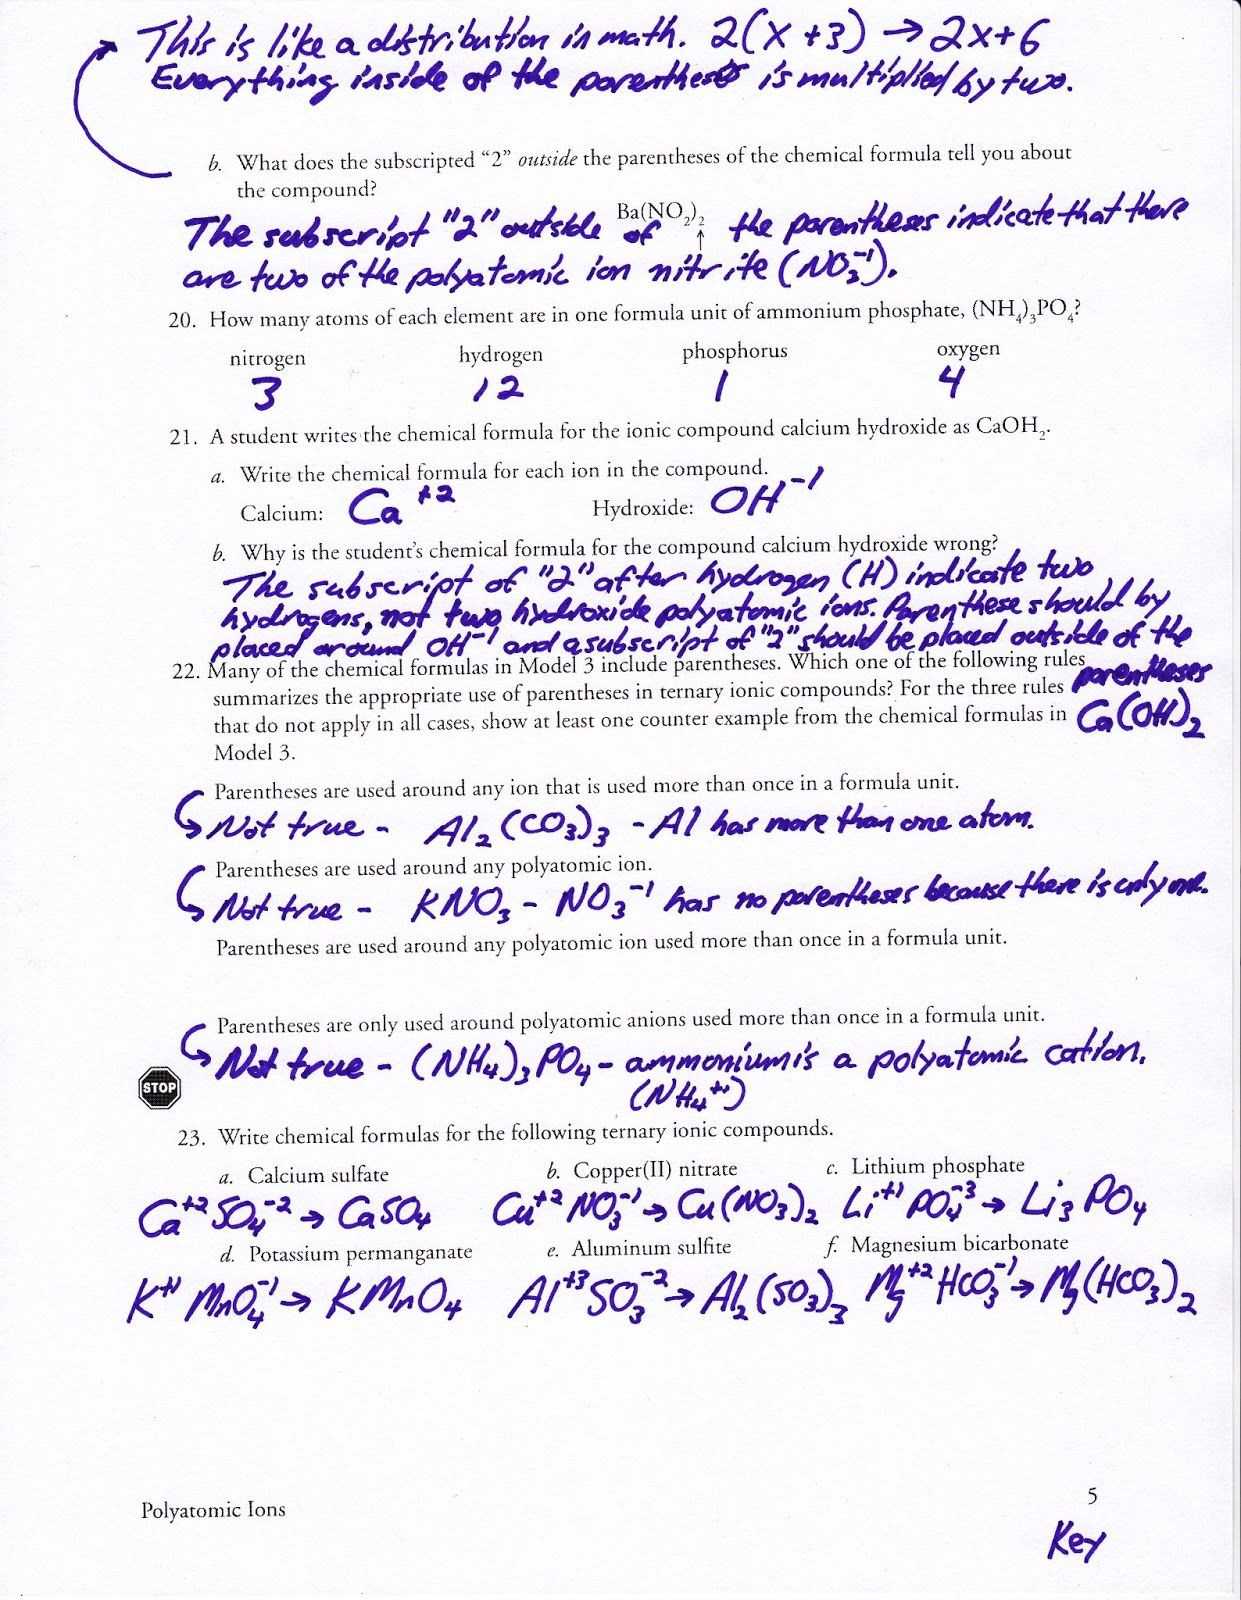 Conservation Of Energy Worksheet Answers as Well as forms Energy Worksheet Answers Fresh Physical Chemistry why are